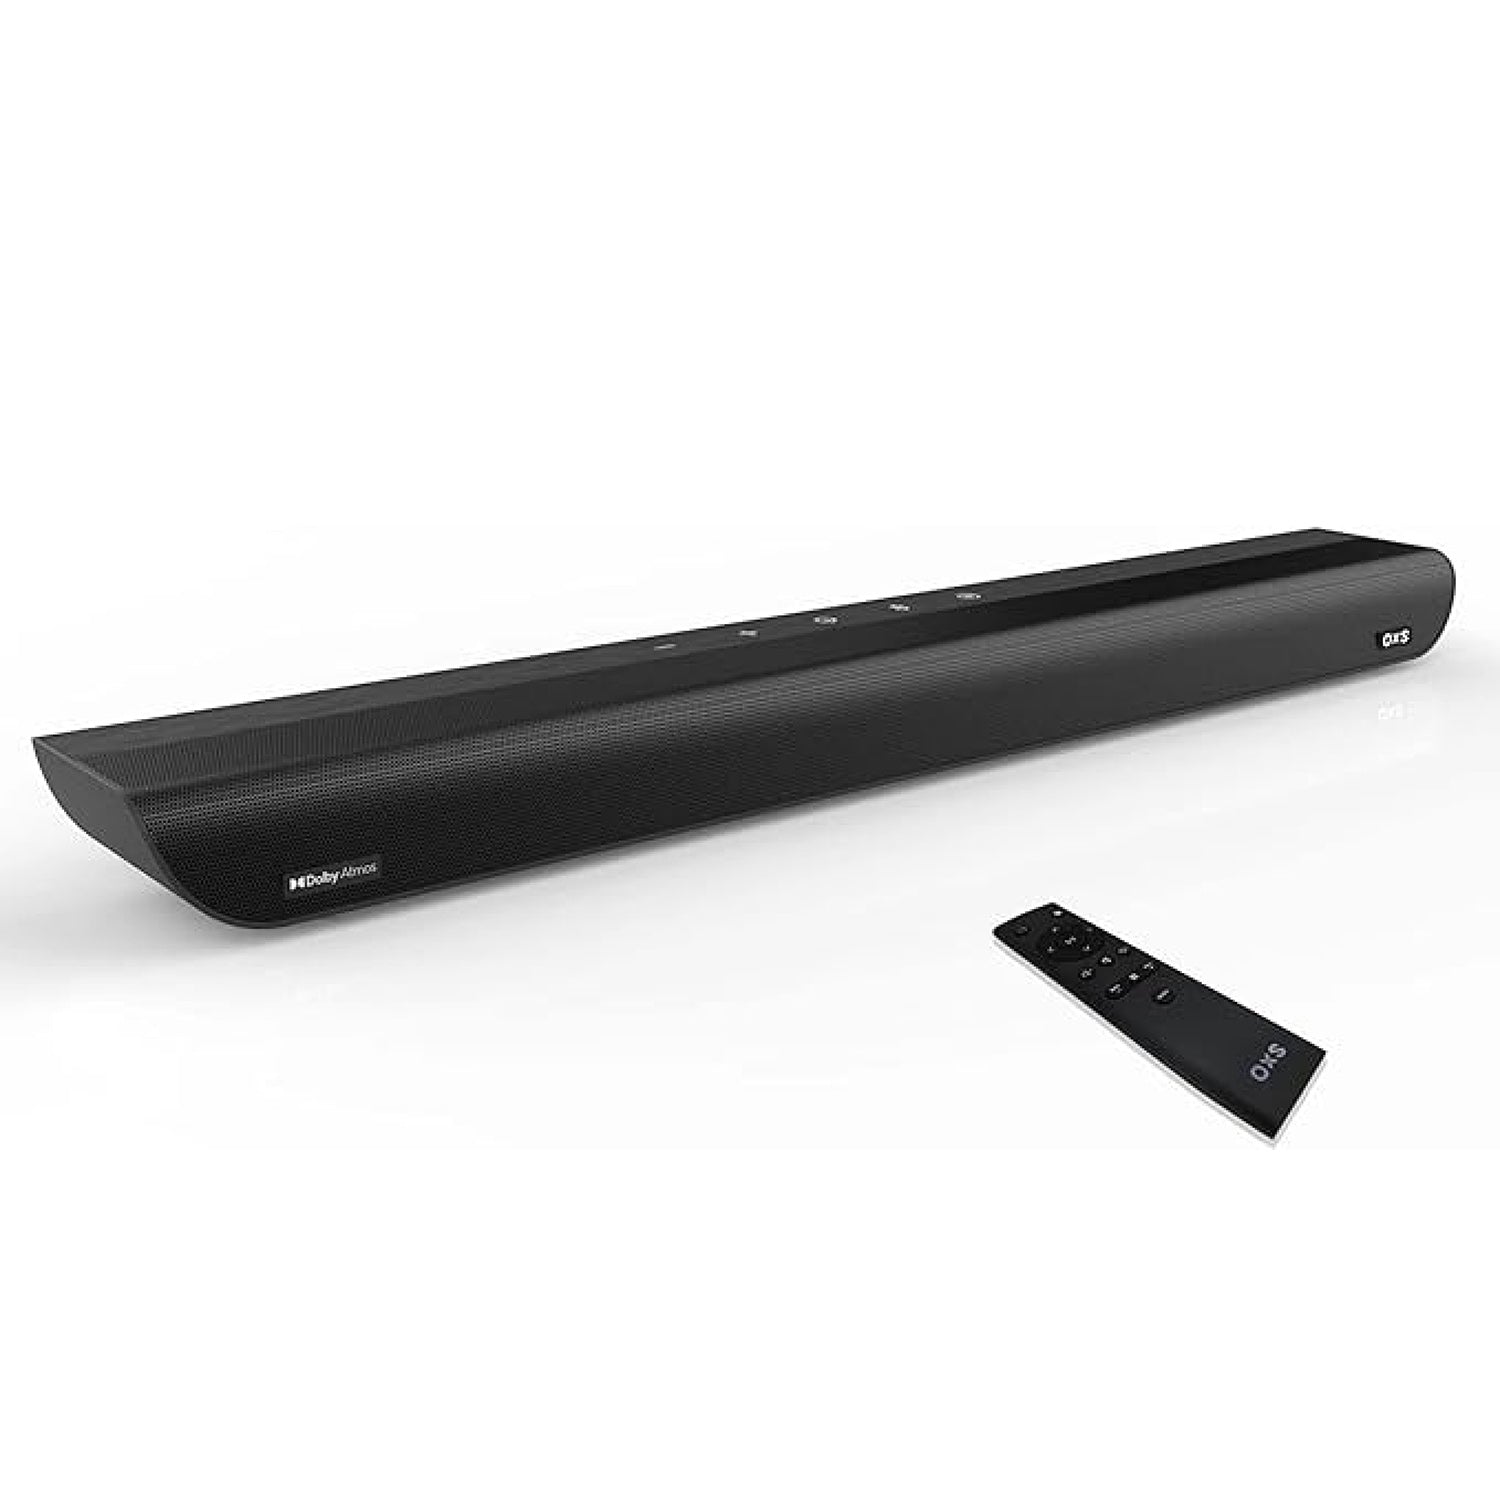 OXS S5 3.1.2 Dolby Atmos TV Soundbar with Built-in Subwoofer